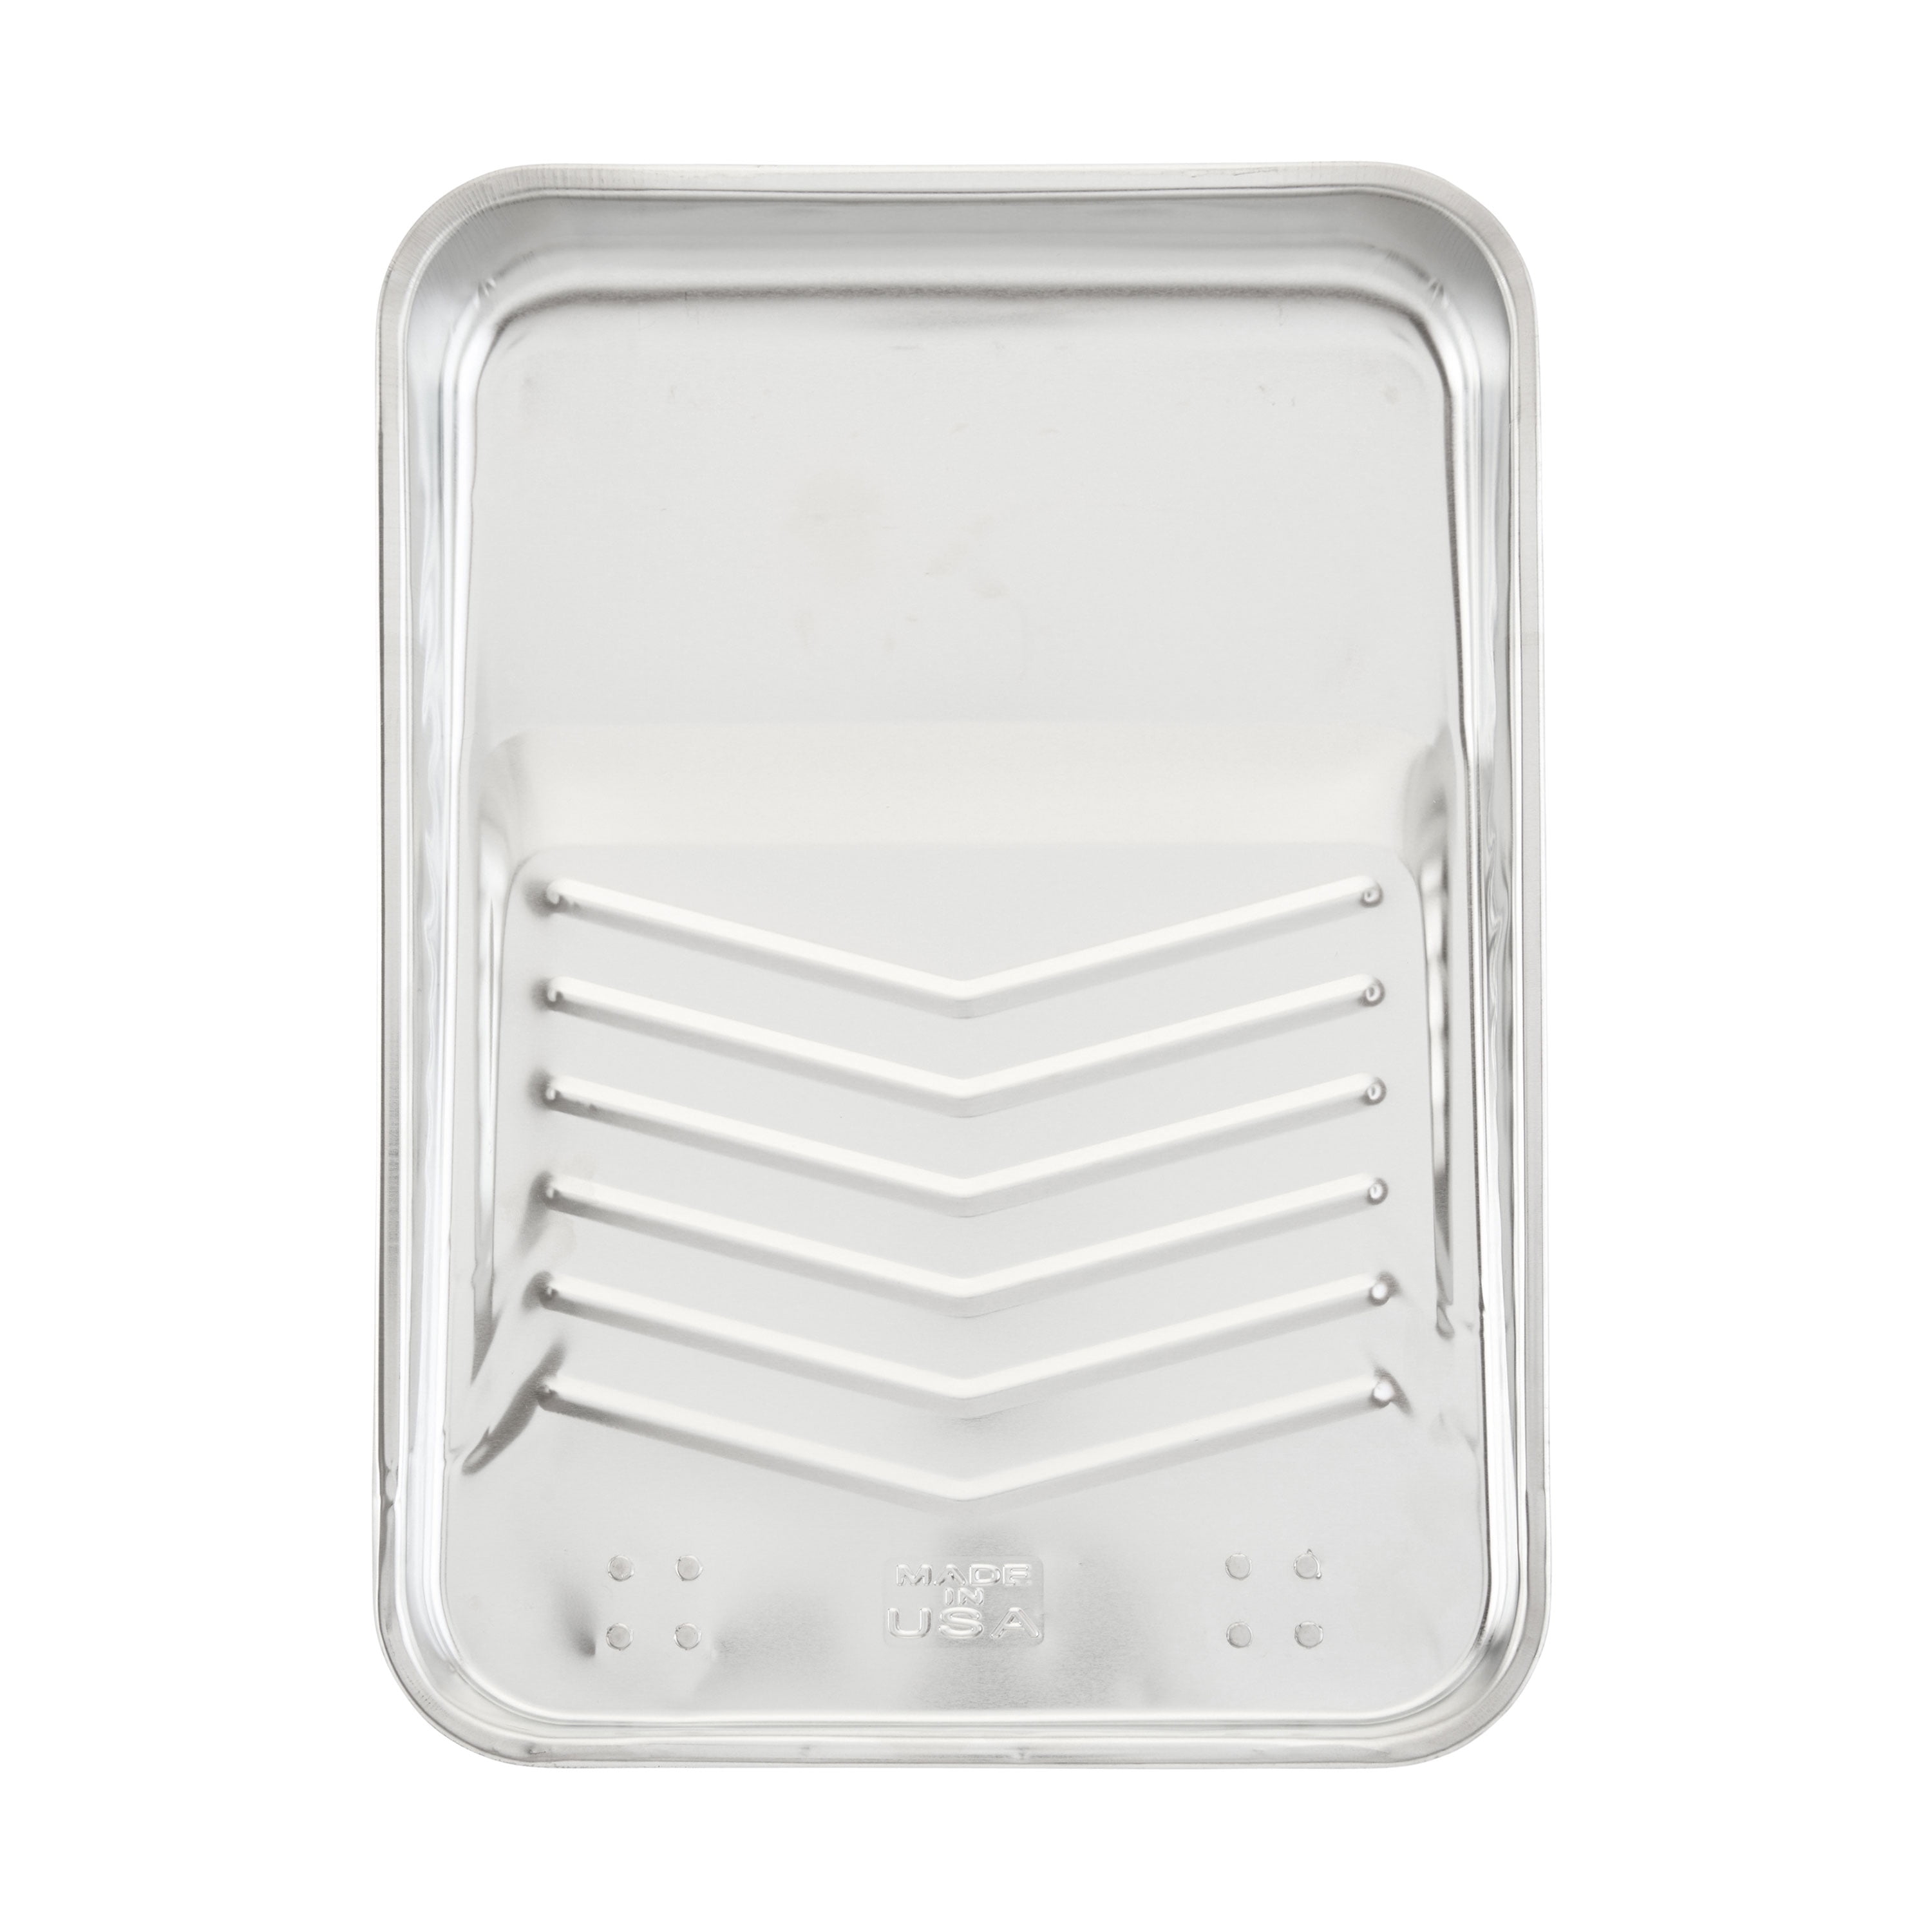 Solvent-Resistant Reusable Metal Paint Tray by Linzer